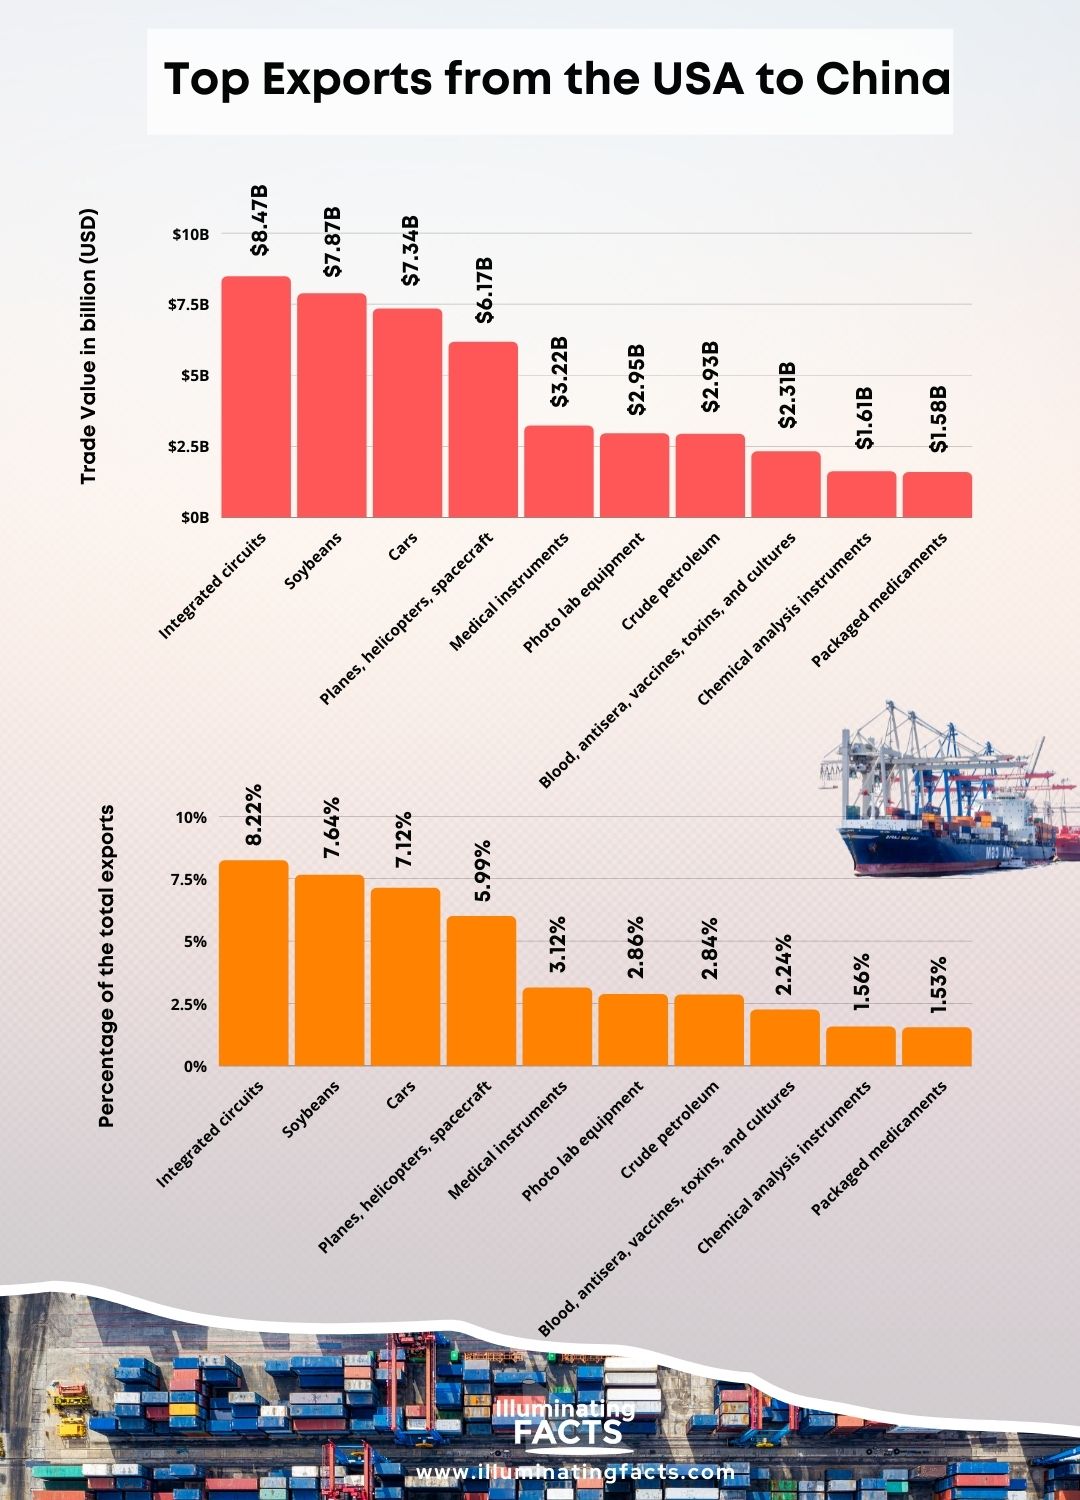 Top Exports from the USA to China